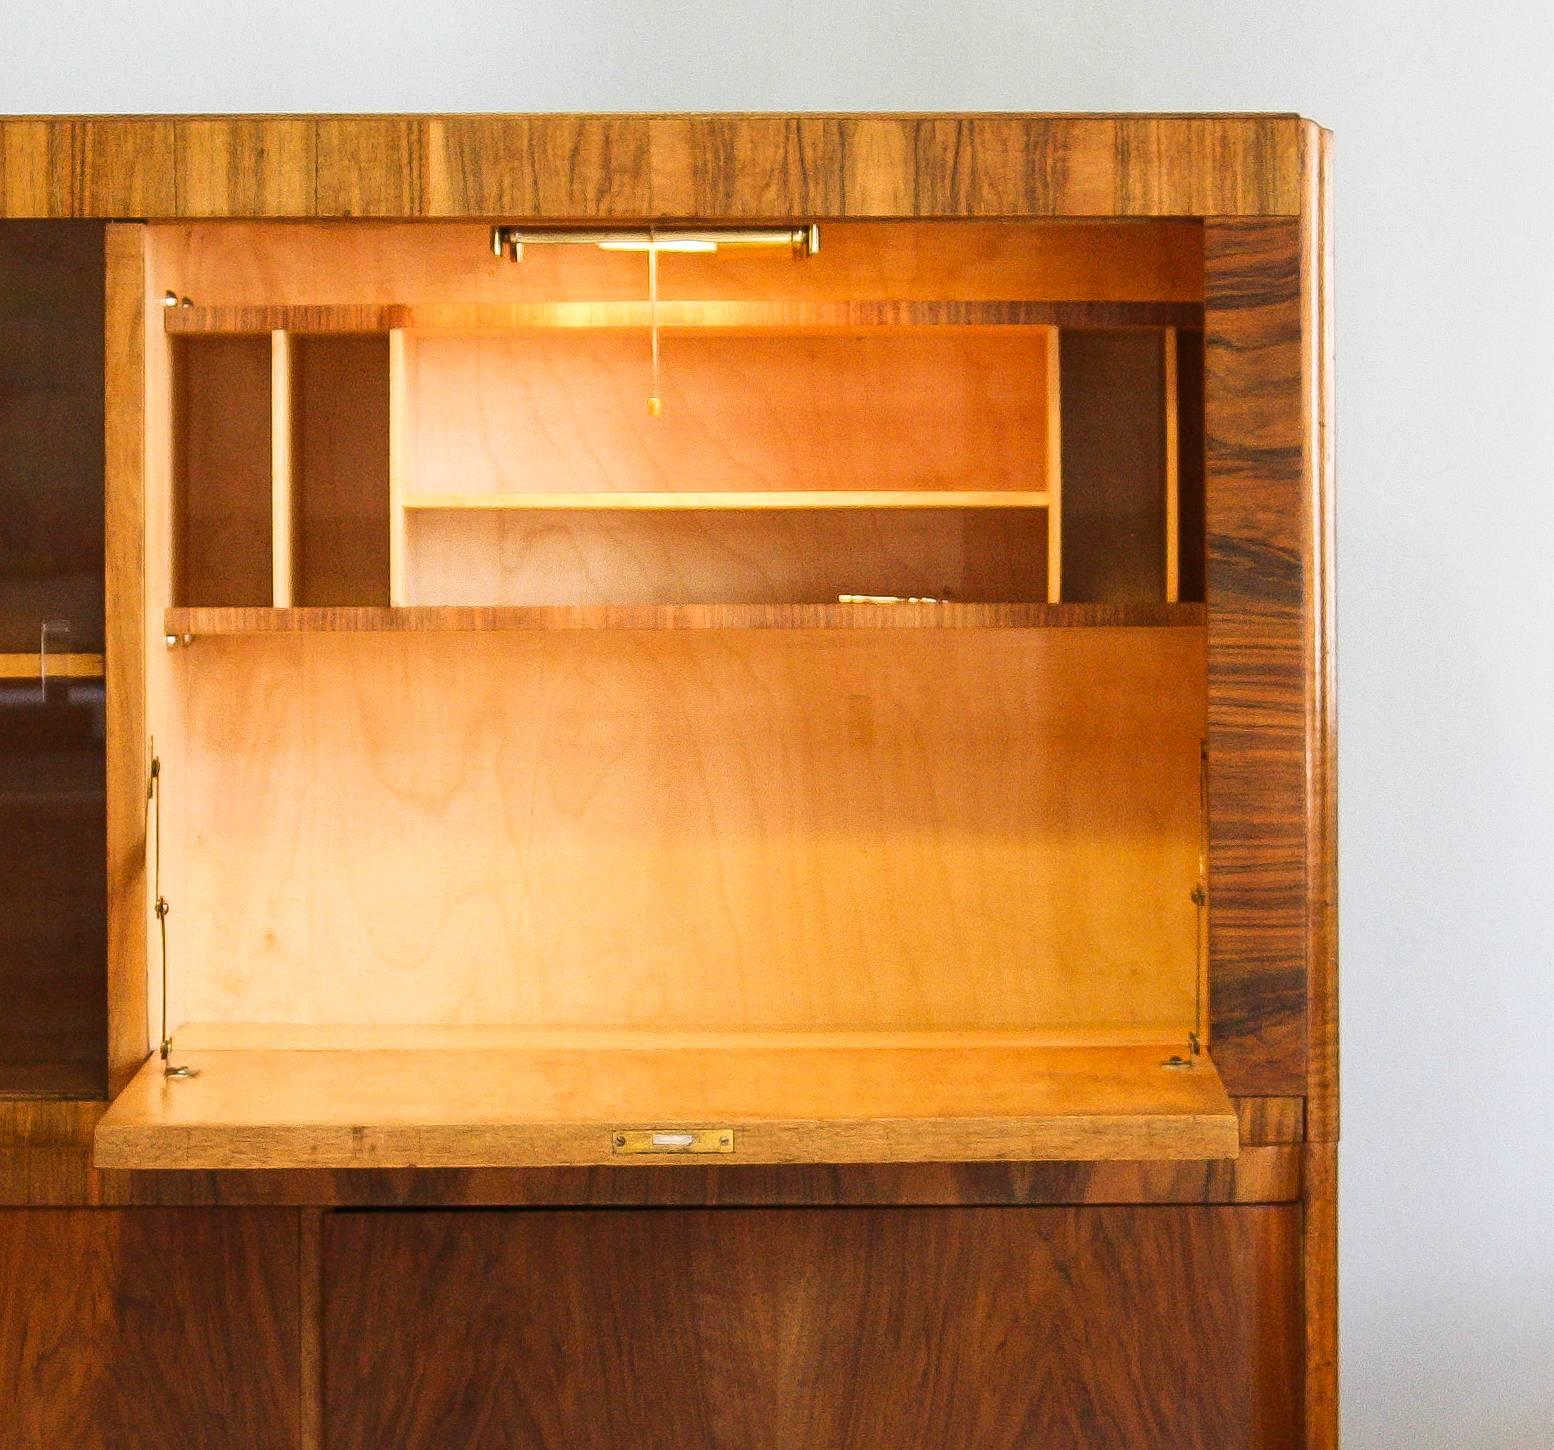 Beautiful “Art Deco” secretairy in burlwood.

The cabinet is in perfect condition.

The secretairy has build-in light.

Next to the secretairy is a cabinet with glas sliding doors. The corner is made of curved glass. Nice detail!

Below the